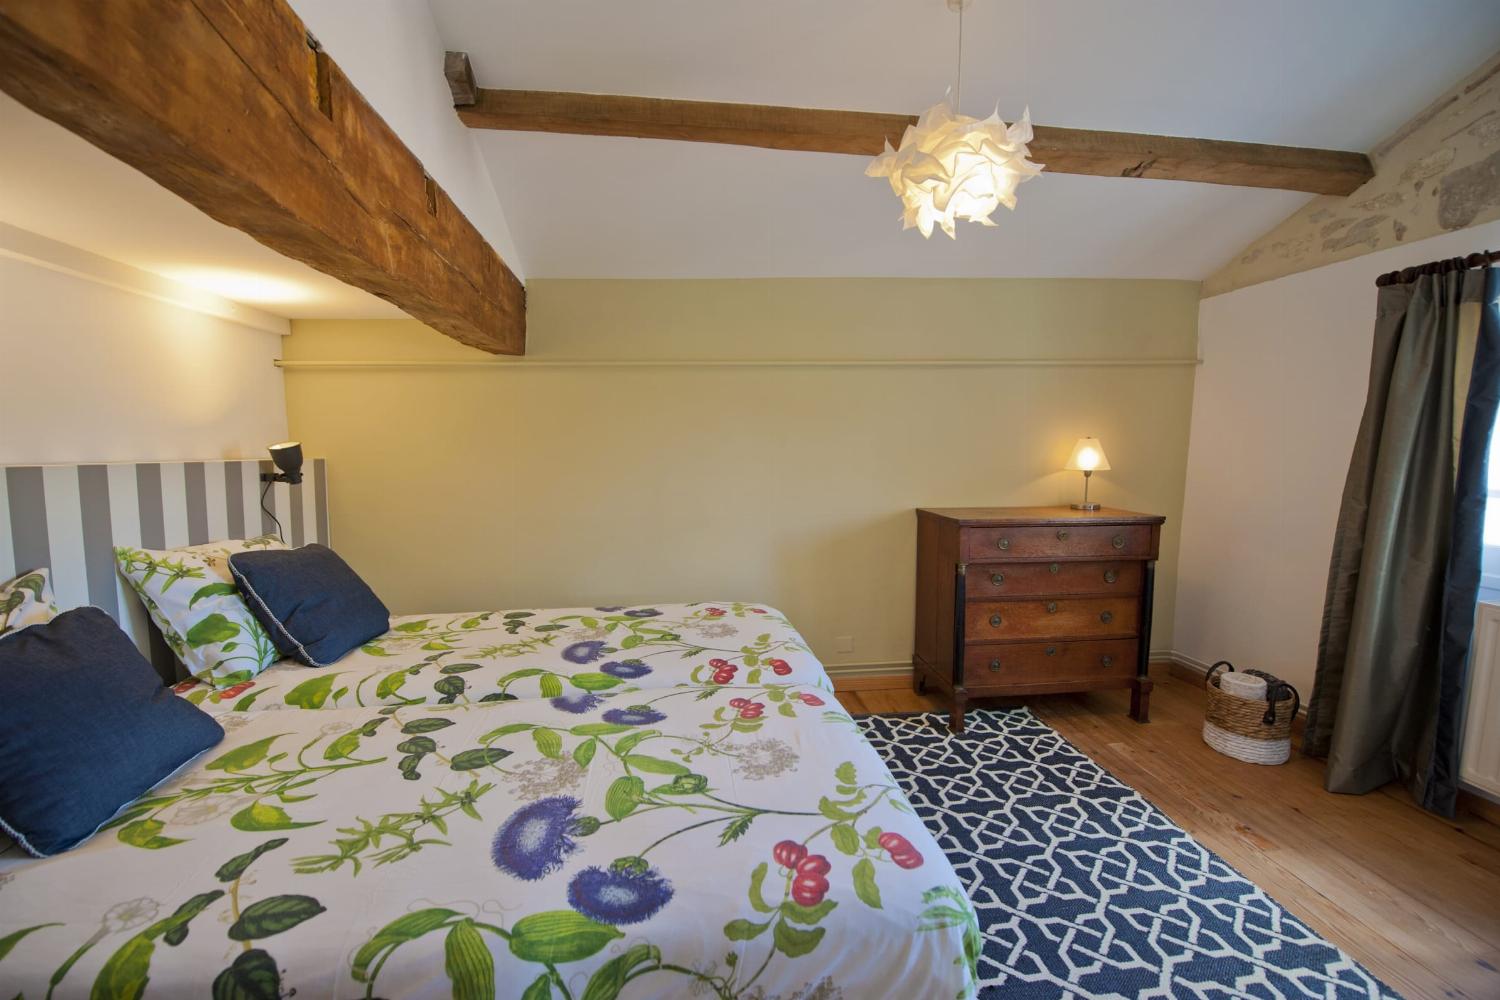 Bedroom | Rental accommodation in Nouvelle-Aquitaine